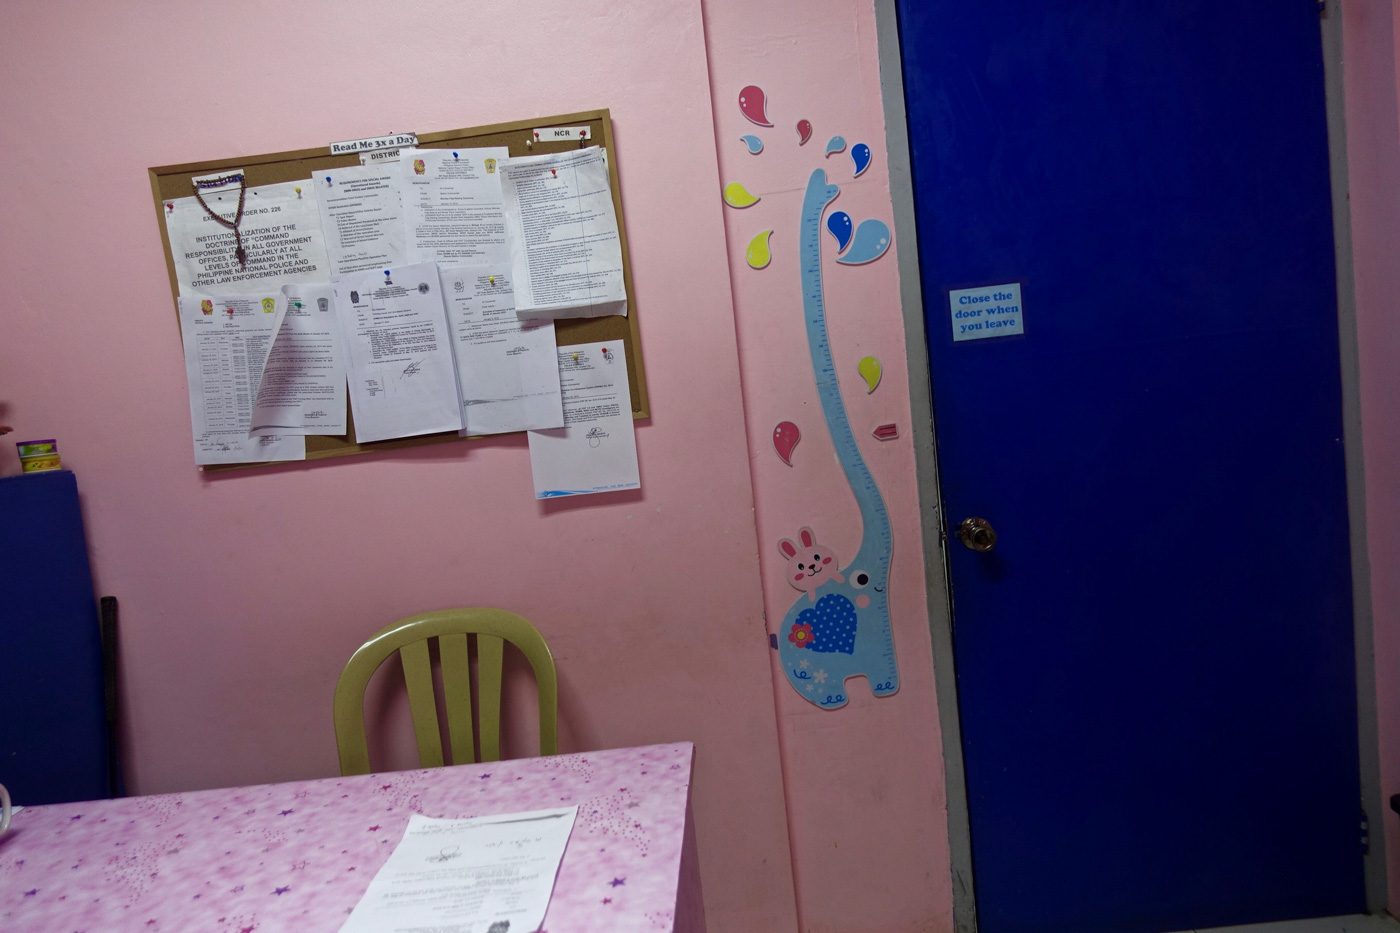 IN PHOTOS: The pink rooms where cops keep children accused of crimes